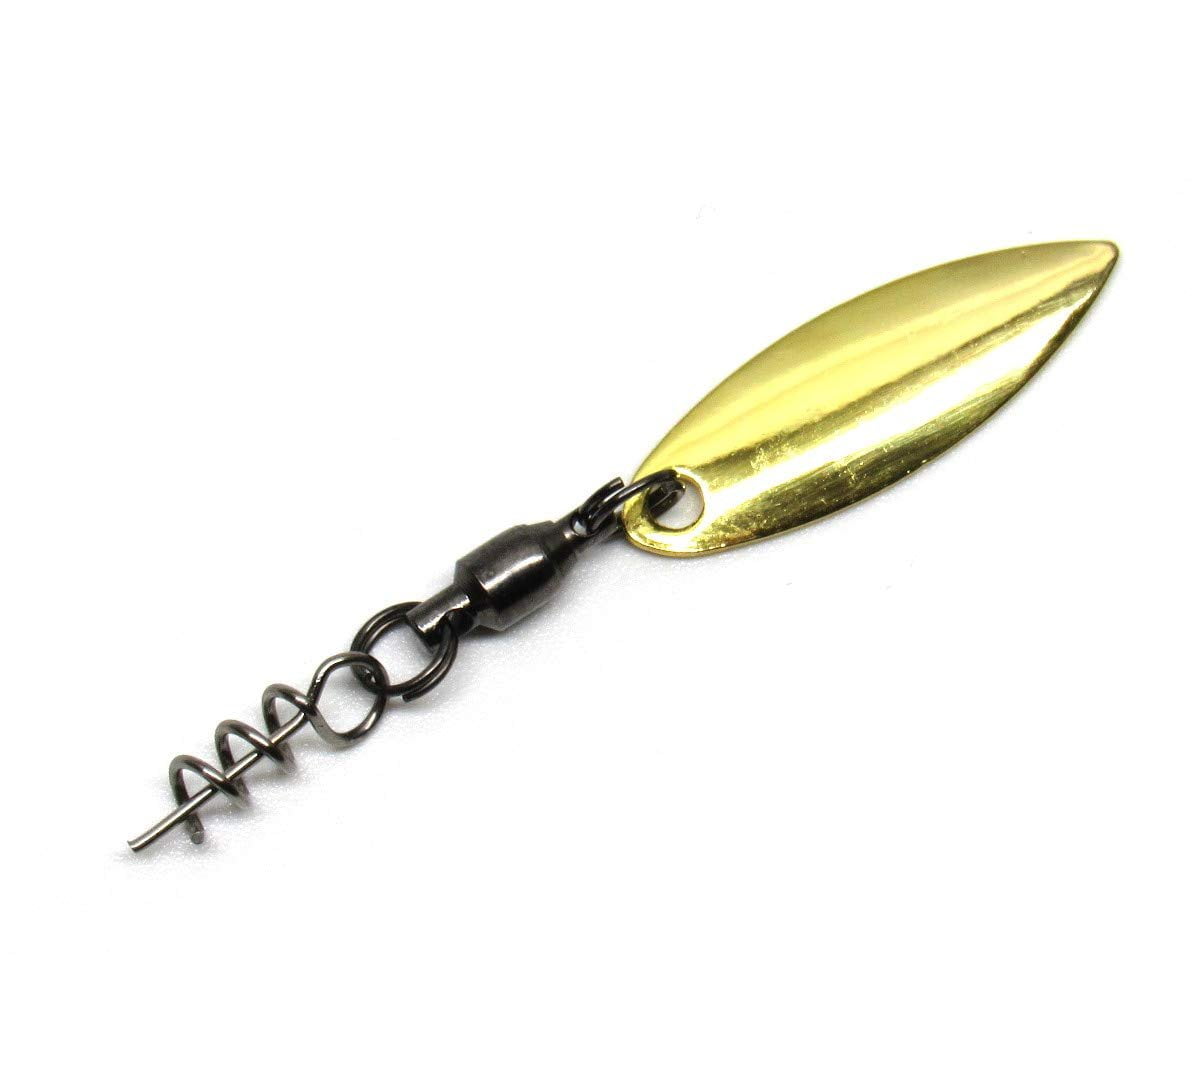 Artificial Bait Soft Plastic Worm Lure Senko Bait Mixed Color Fishing Hook Swivel Tackle for Walleye Bass Pike Spinner Bait